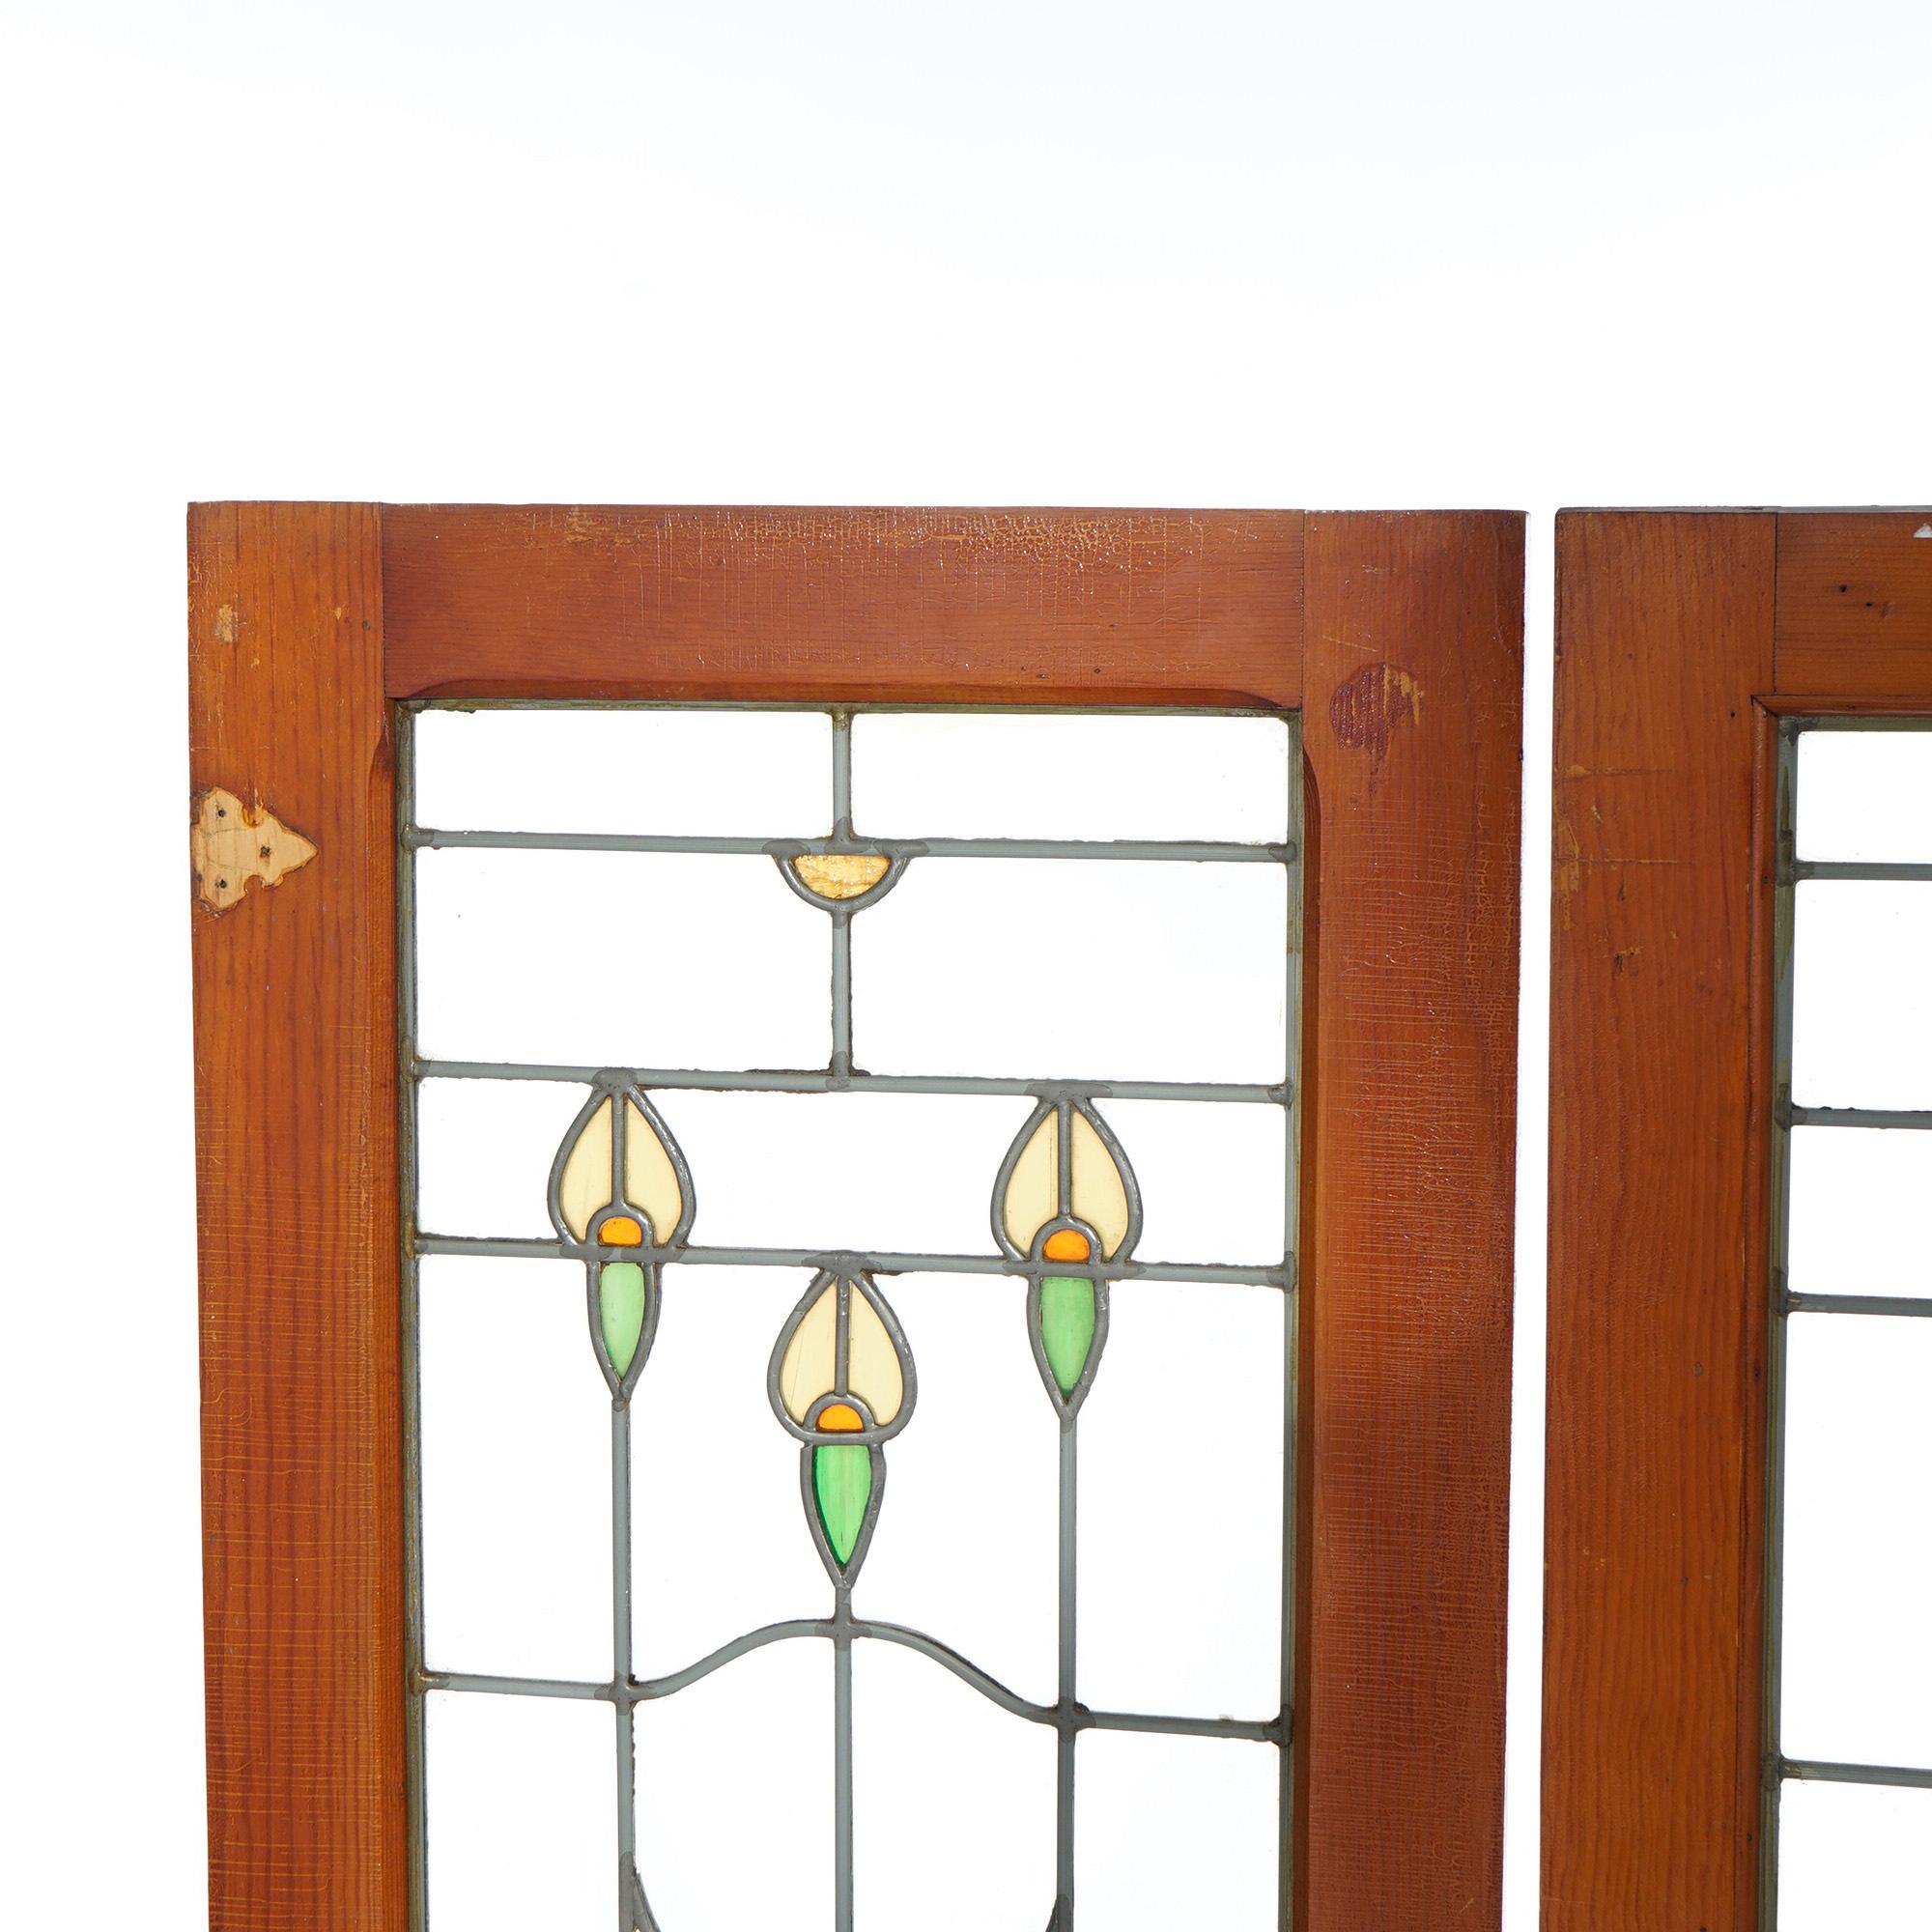 American Three Antique Arts & Crafts Leaded Glass Panels with Stylized Flowers, c1910